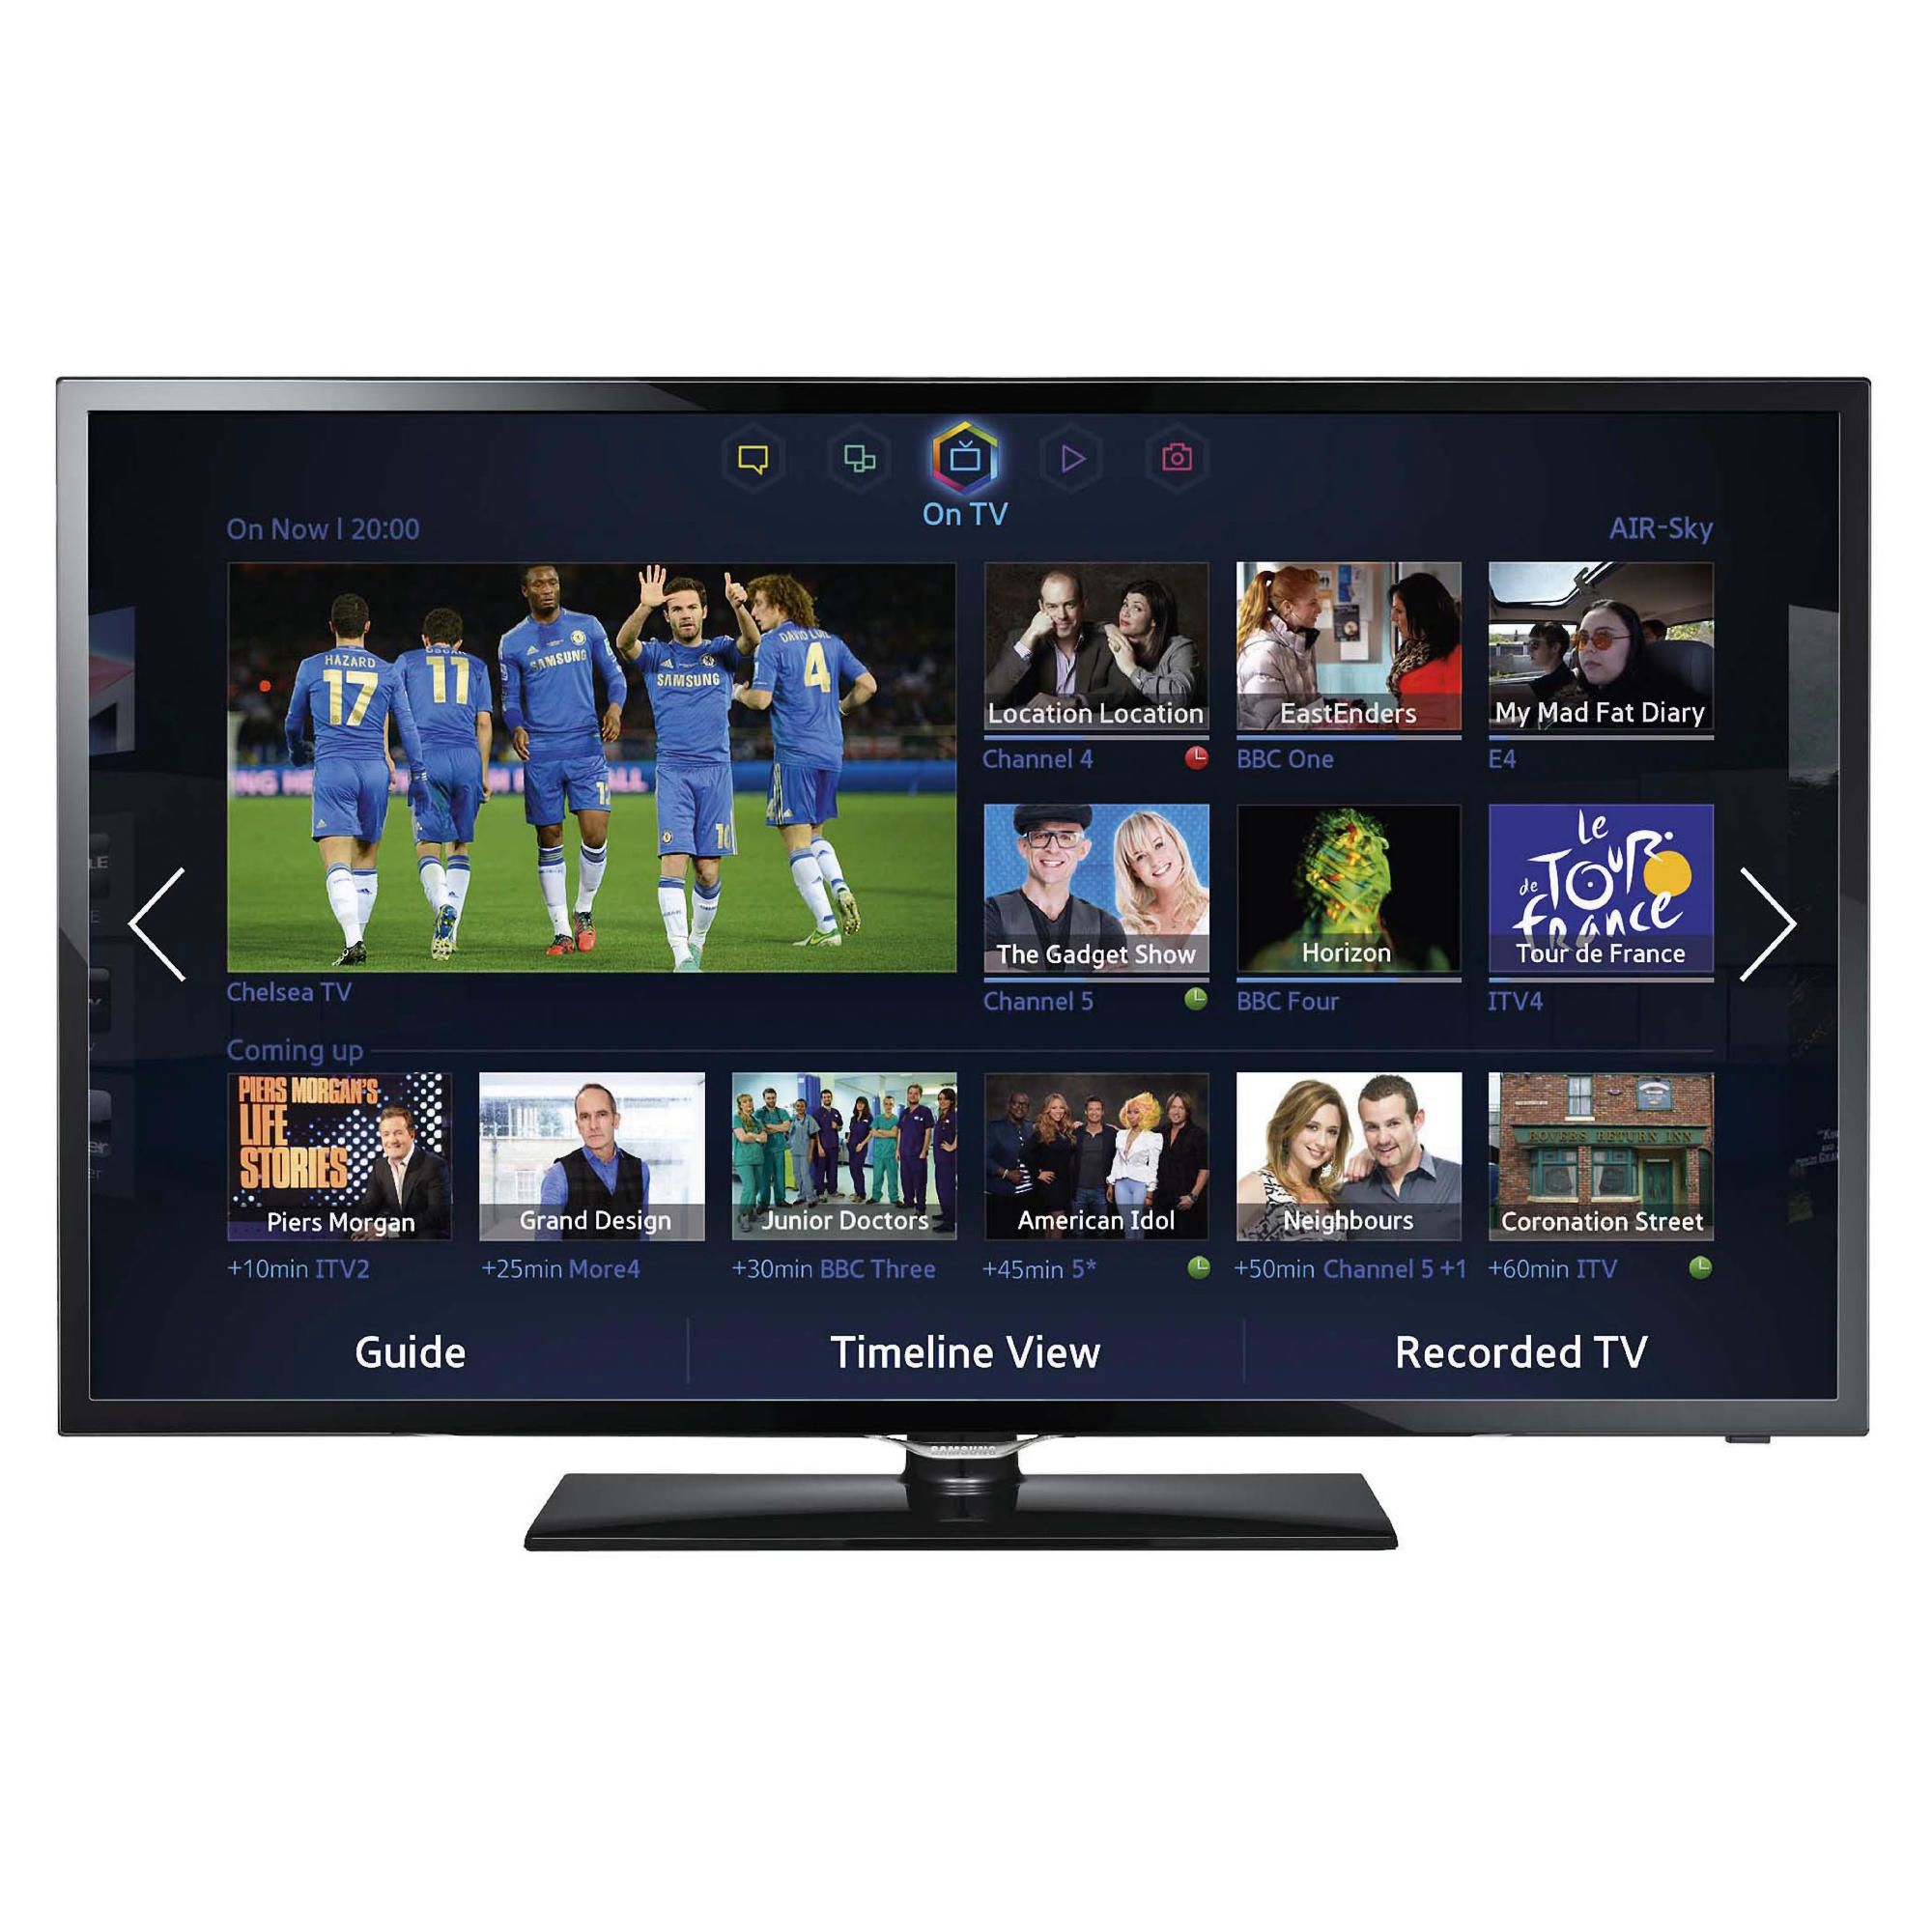 Samsung UE40F5300 40 Inch Full HD 1080p Slim LED Smart WiFi TV with Freeview HD